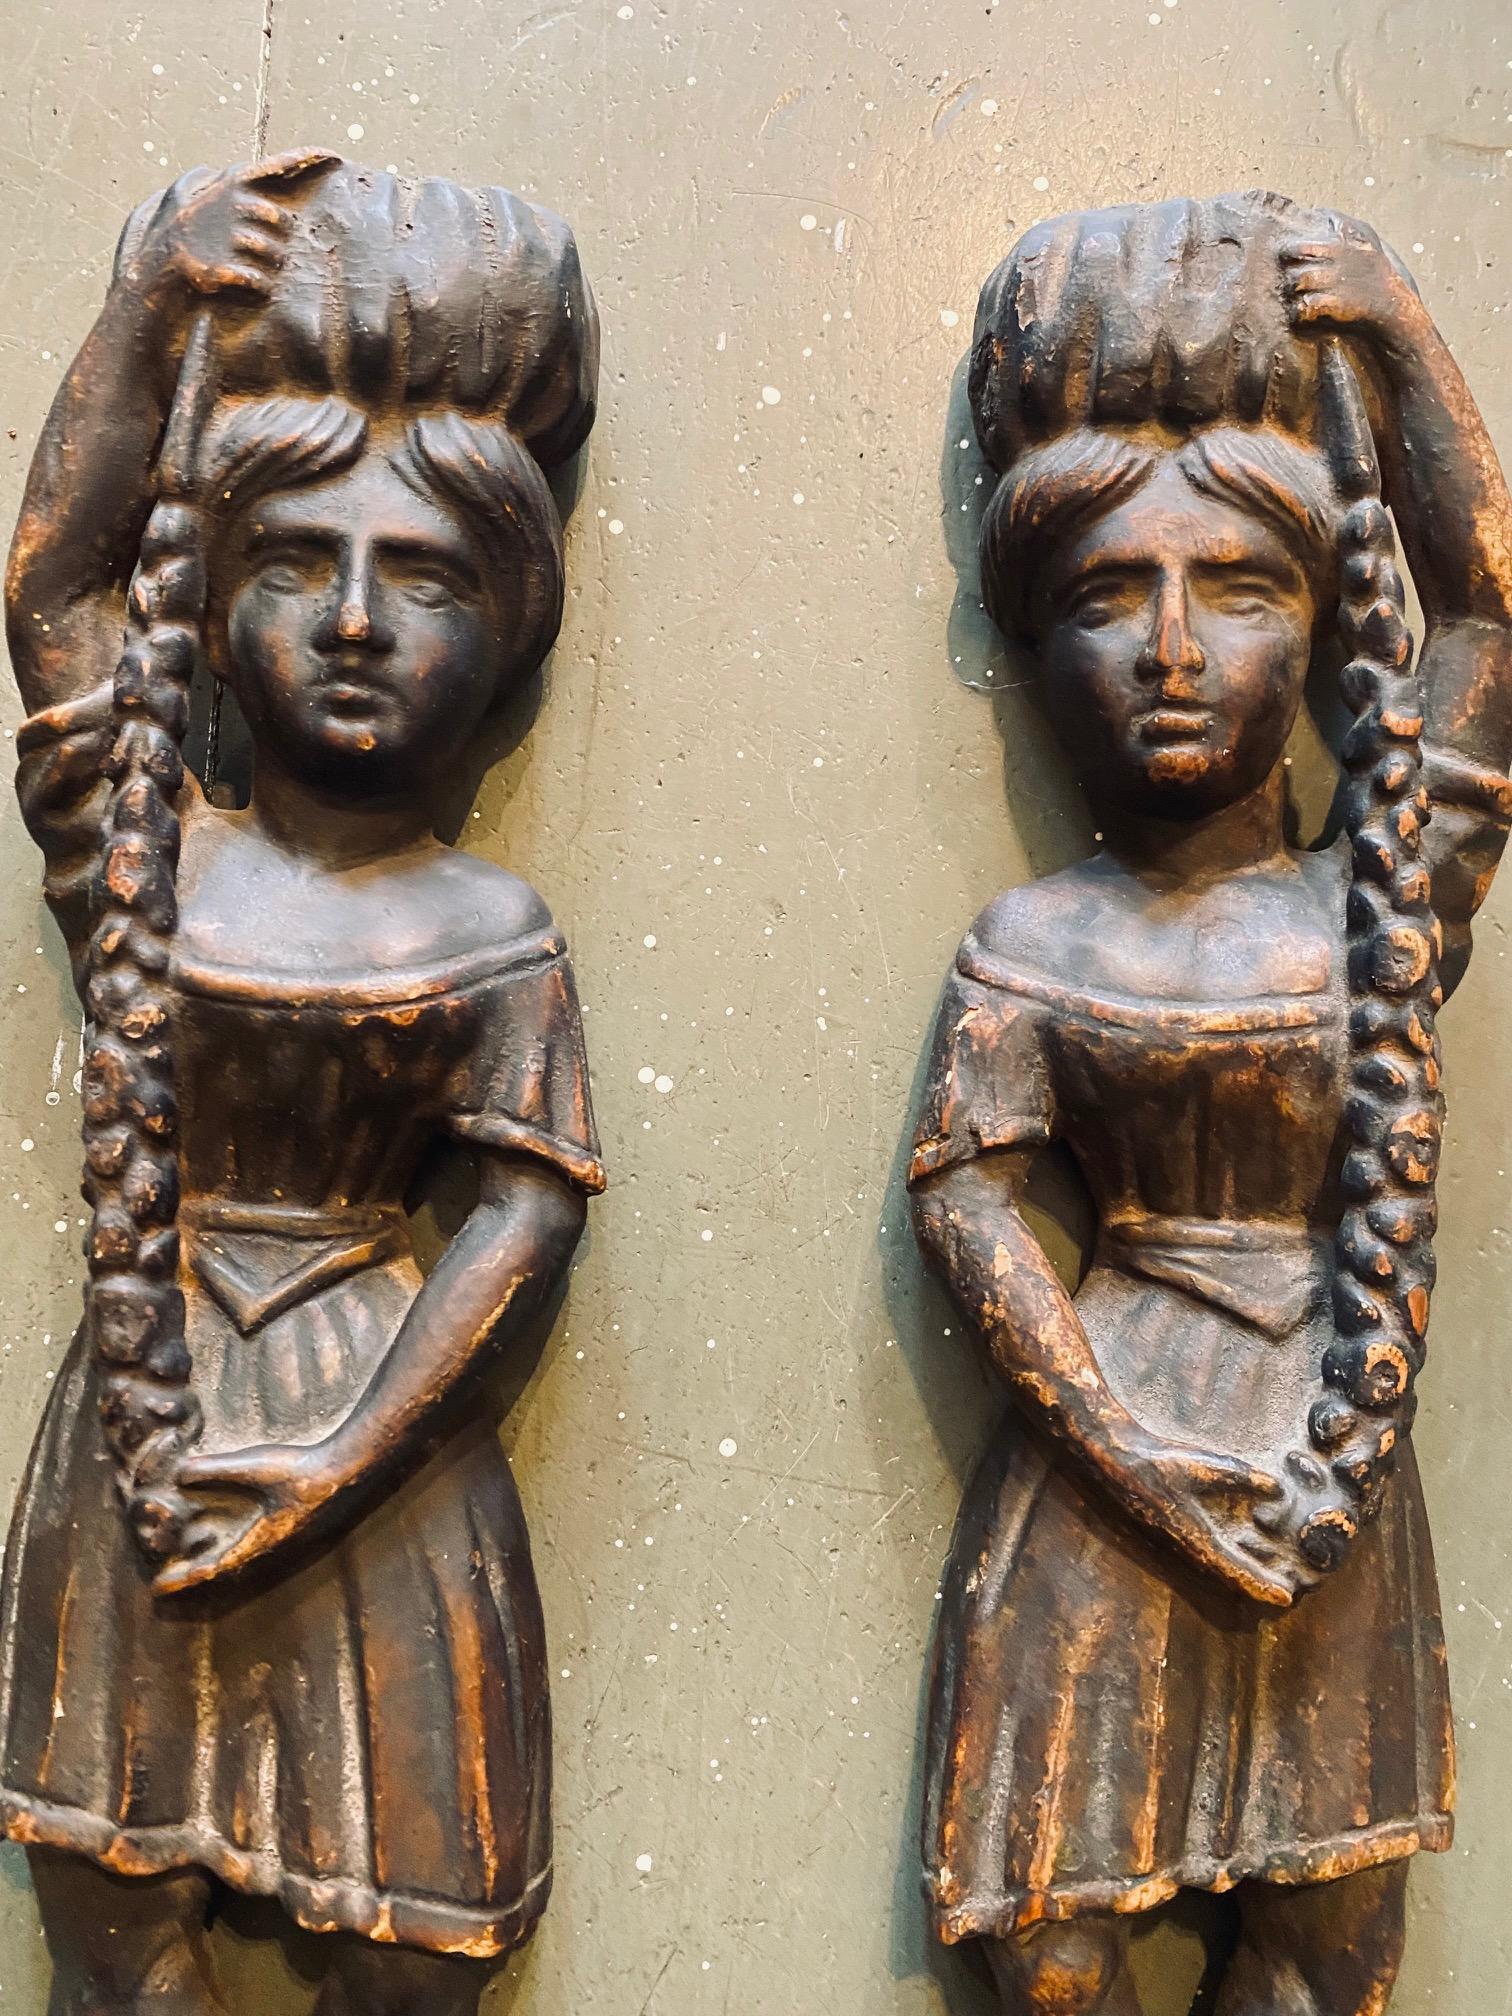 Extremely rare and very special pair of 18th century native American tobacco store hanging trade figures, hand carved in the half round full length figures of two American Indian women portrayed in the classical noble fashion prominent in the 17th